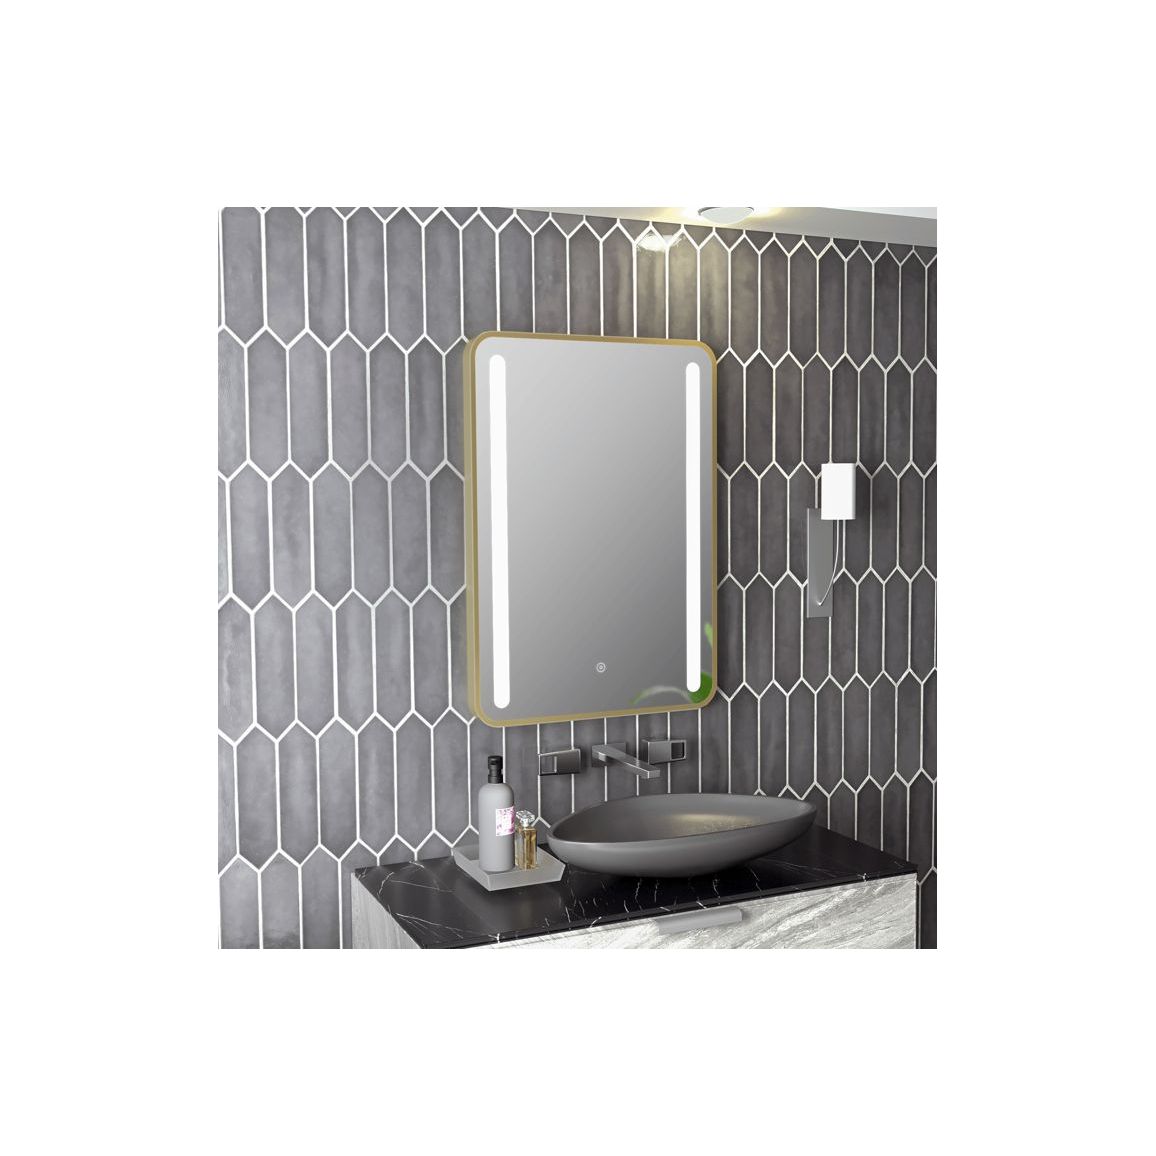 Osun 500x700mm Rounded Front-Lit LED Mirror - Brushed Brass